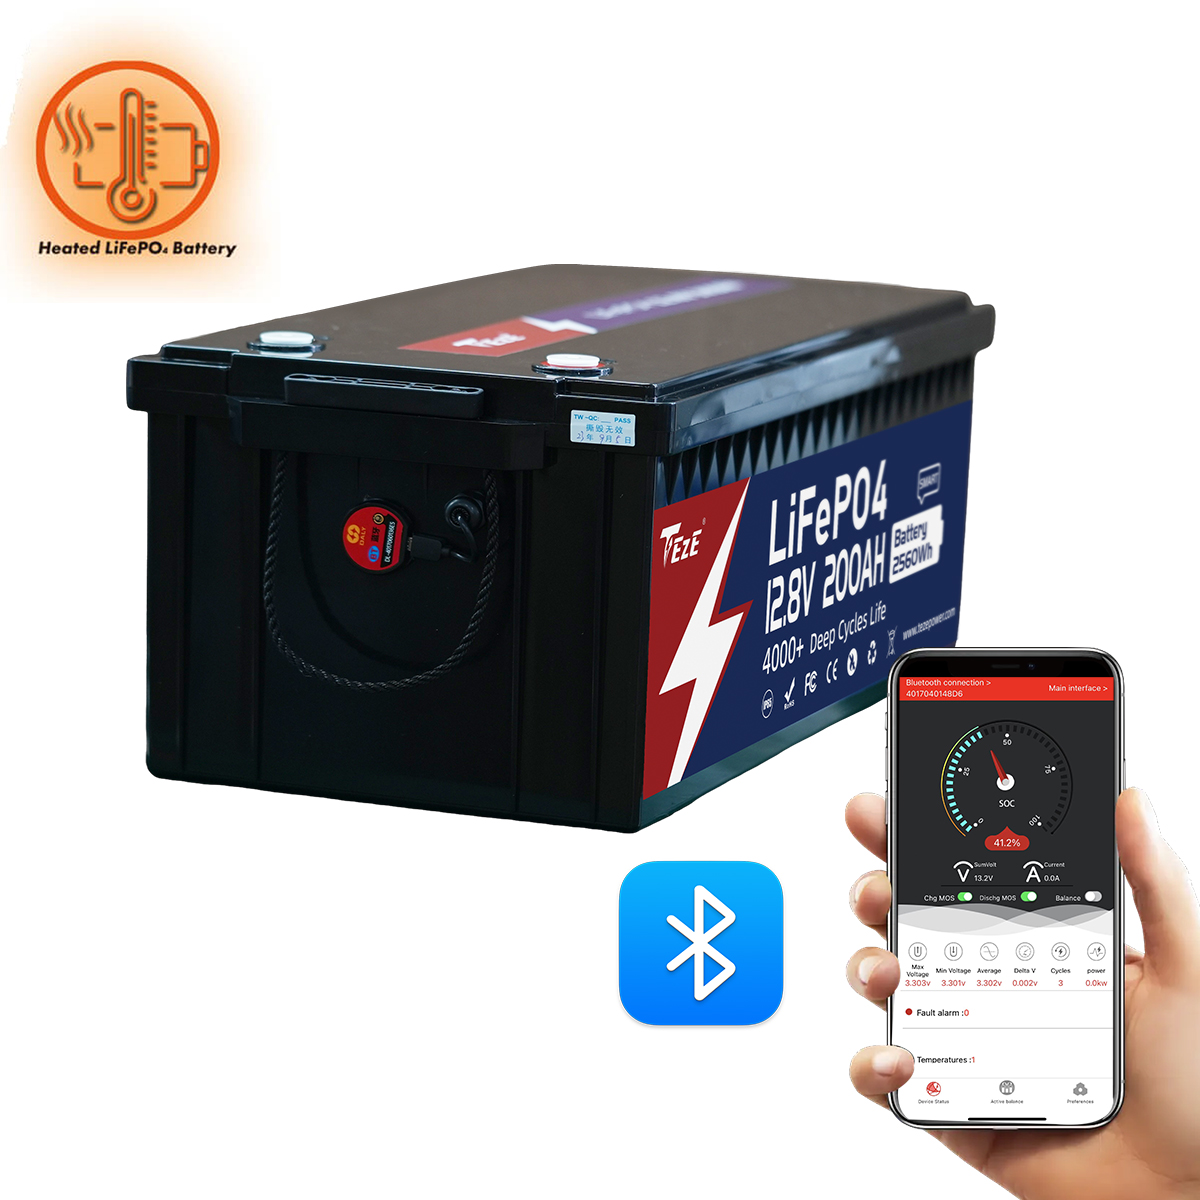 NEW-TezePower 12V200Ah LiFePO4 Battery with Bluetooth, Self-heating and Active Balancer, Built-in 200A Daly BMS (Bluetooth External Version)